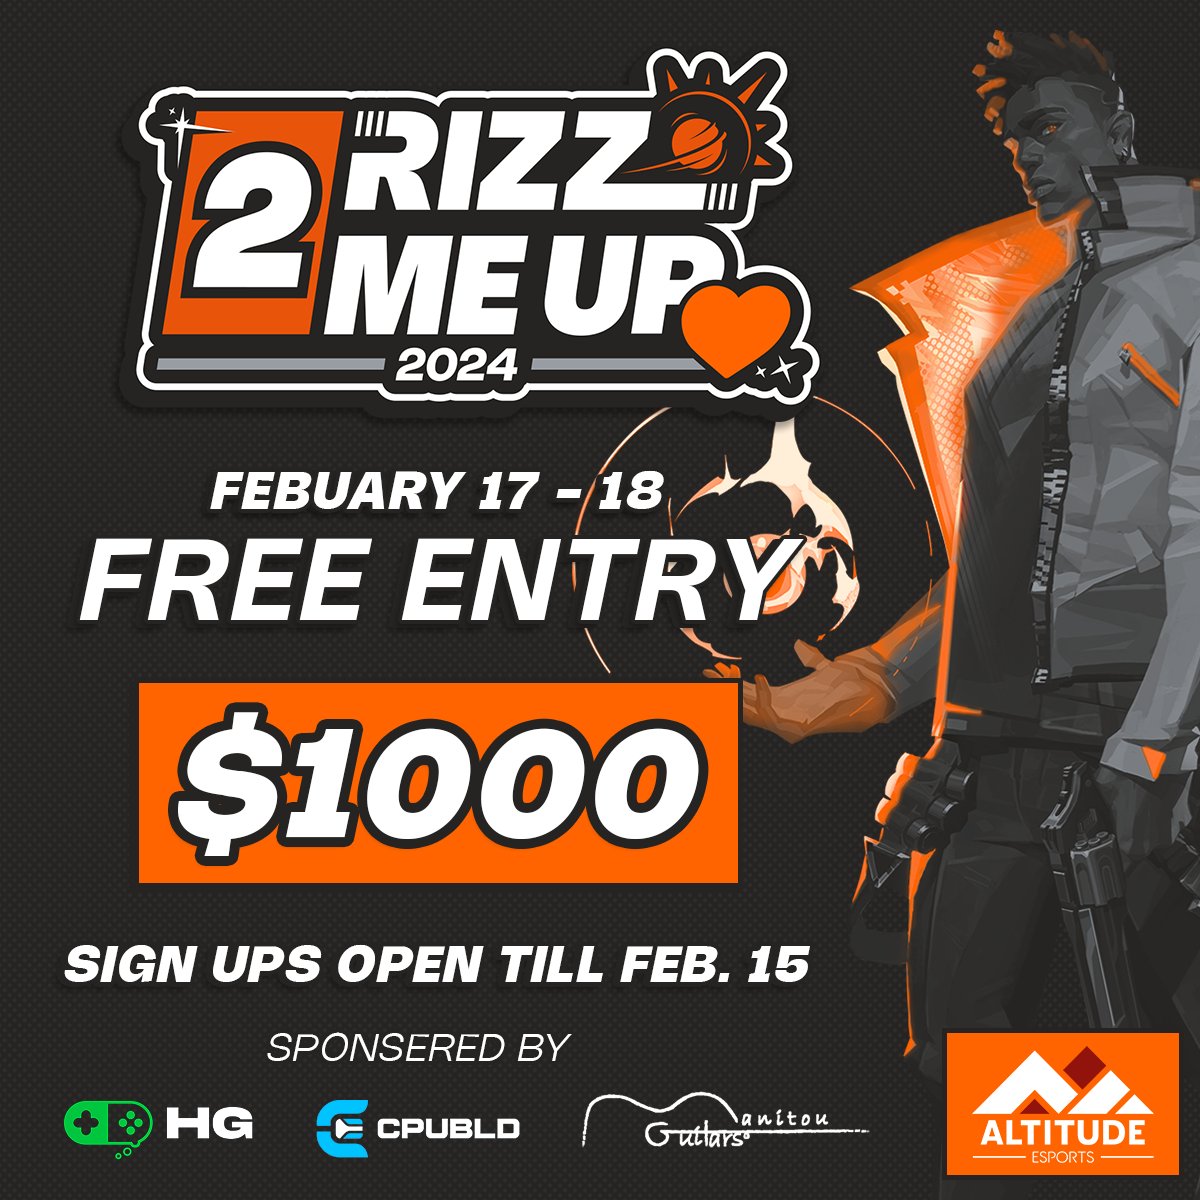 The Rizz Me Up Invitational is back, and better than ever! Rizz me up 2.0, Feb 17-18 2024. Sign Up Here: esportsaltitude.com